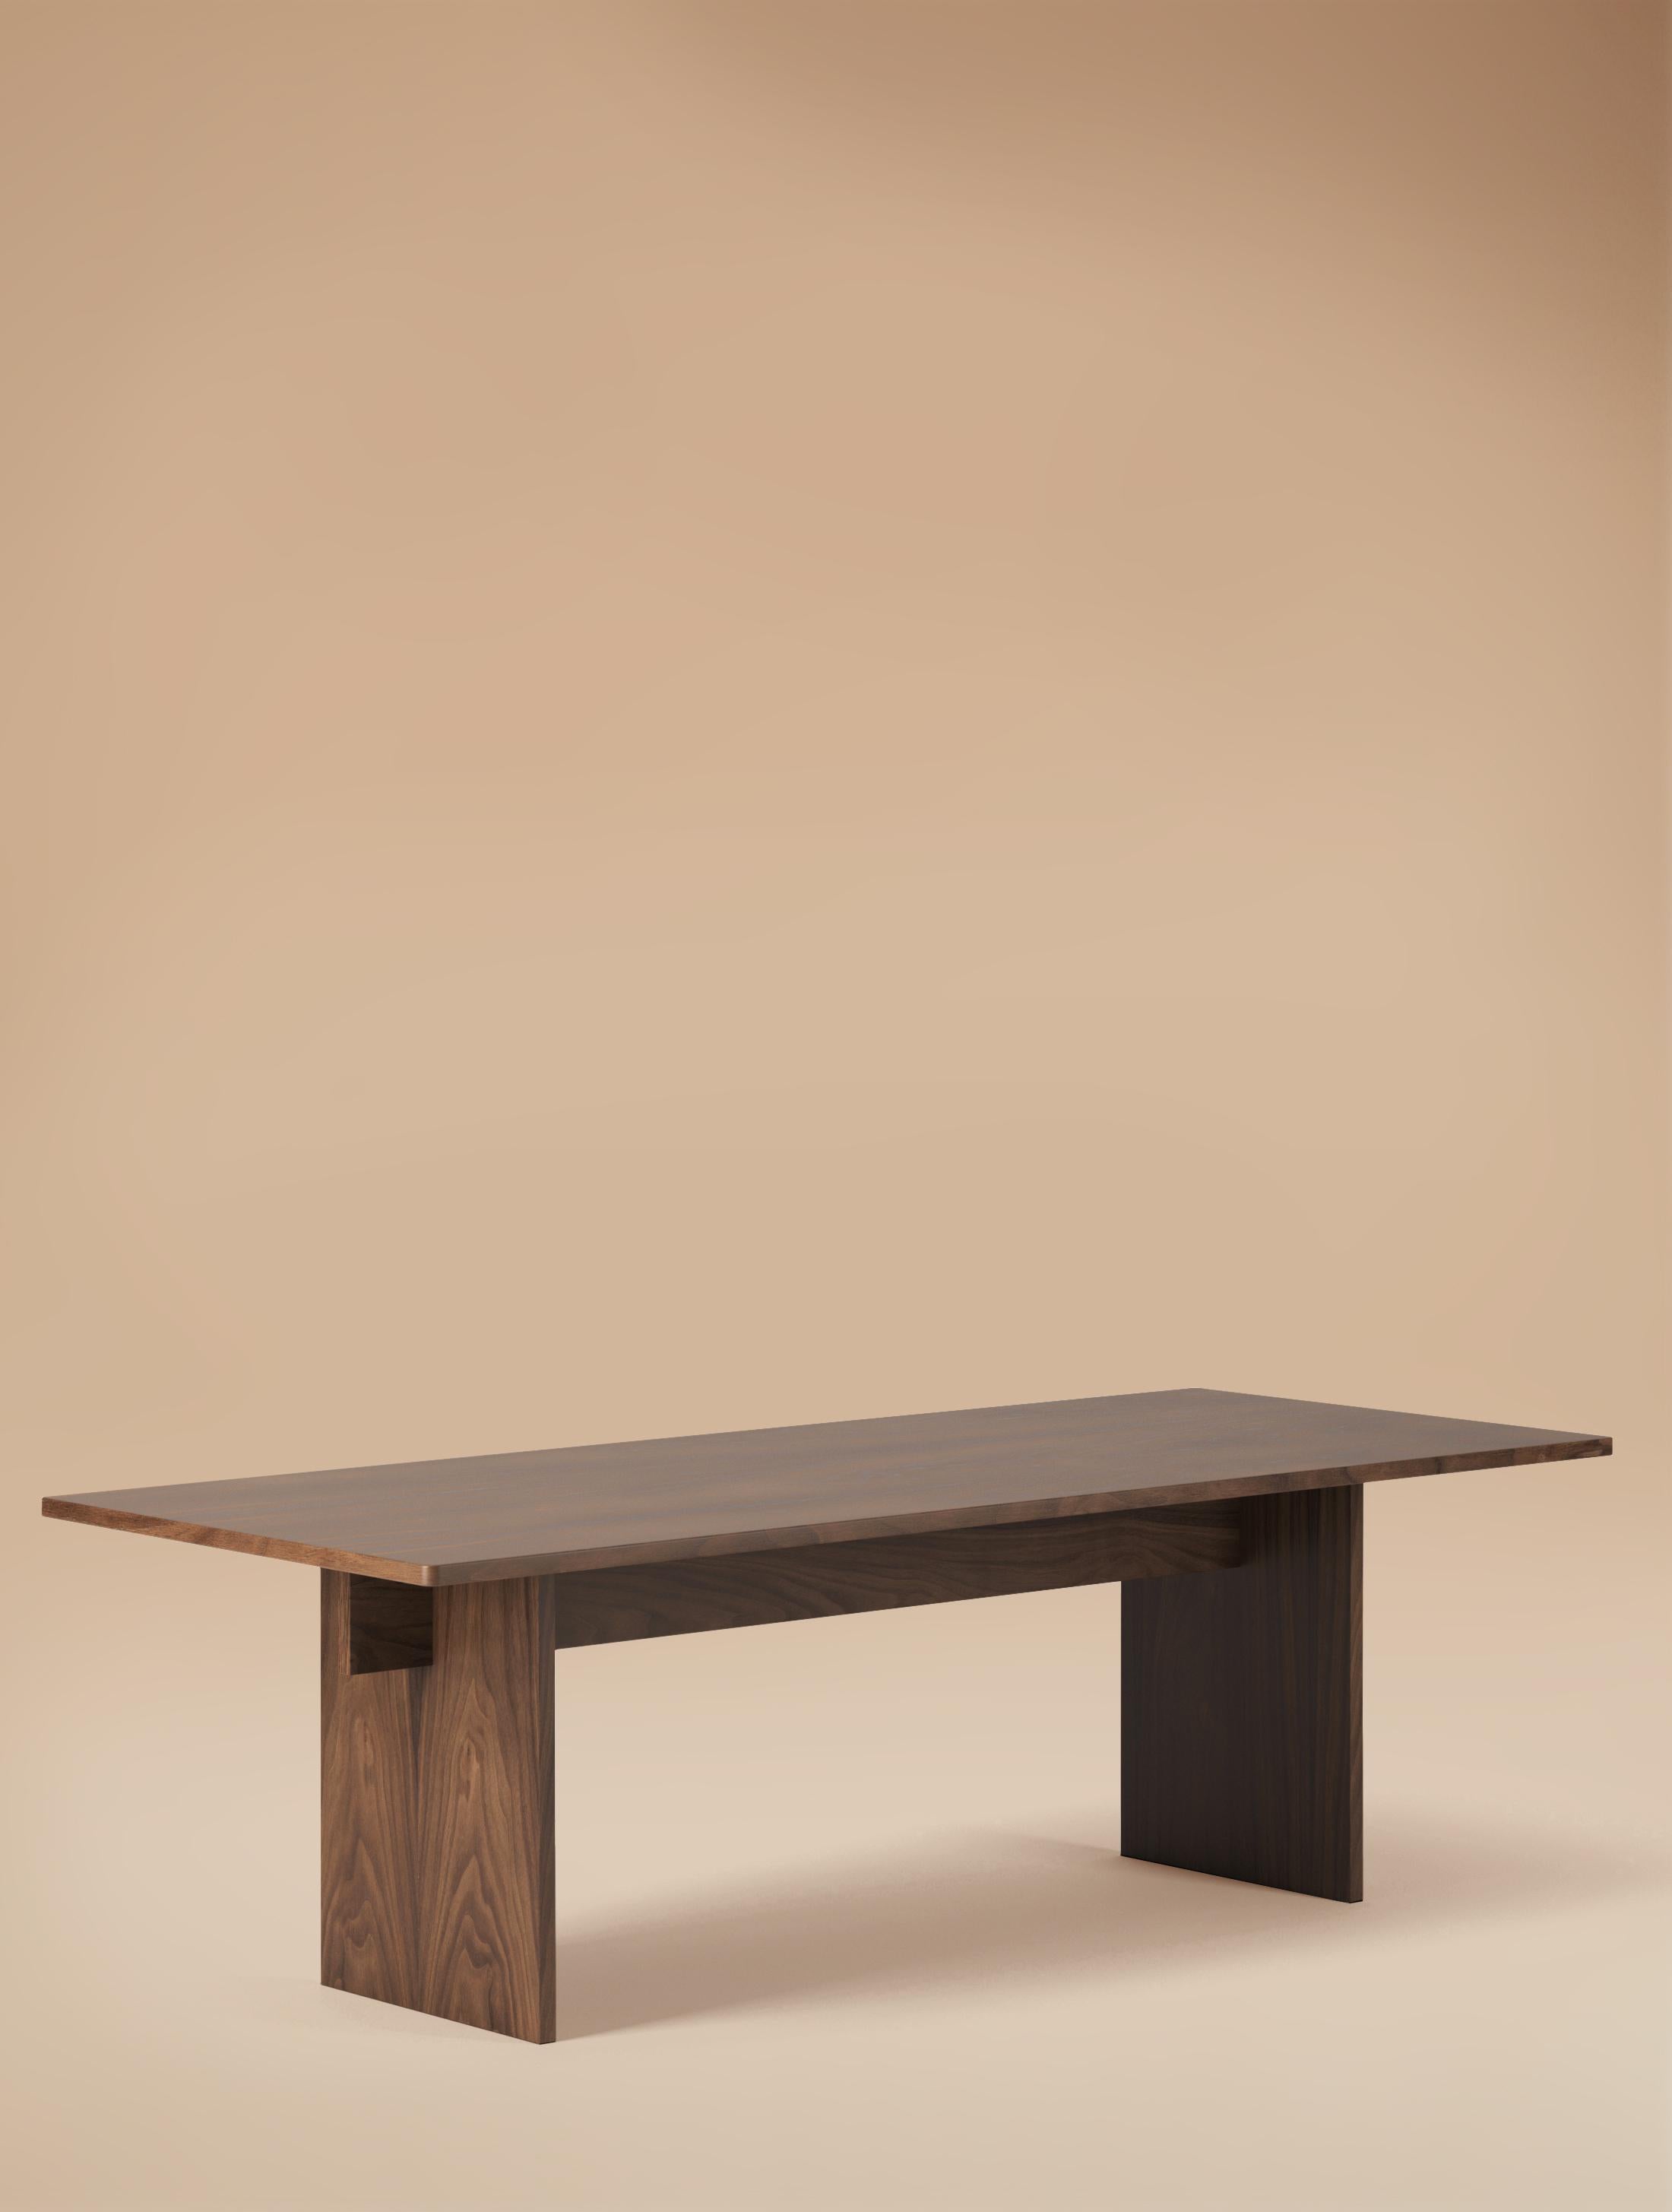 6 Seater Faure Table Handcrafted in Blackened Oiled Oak by Lemon 12